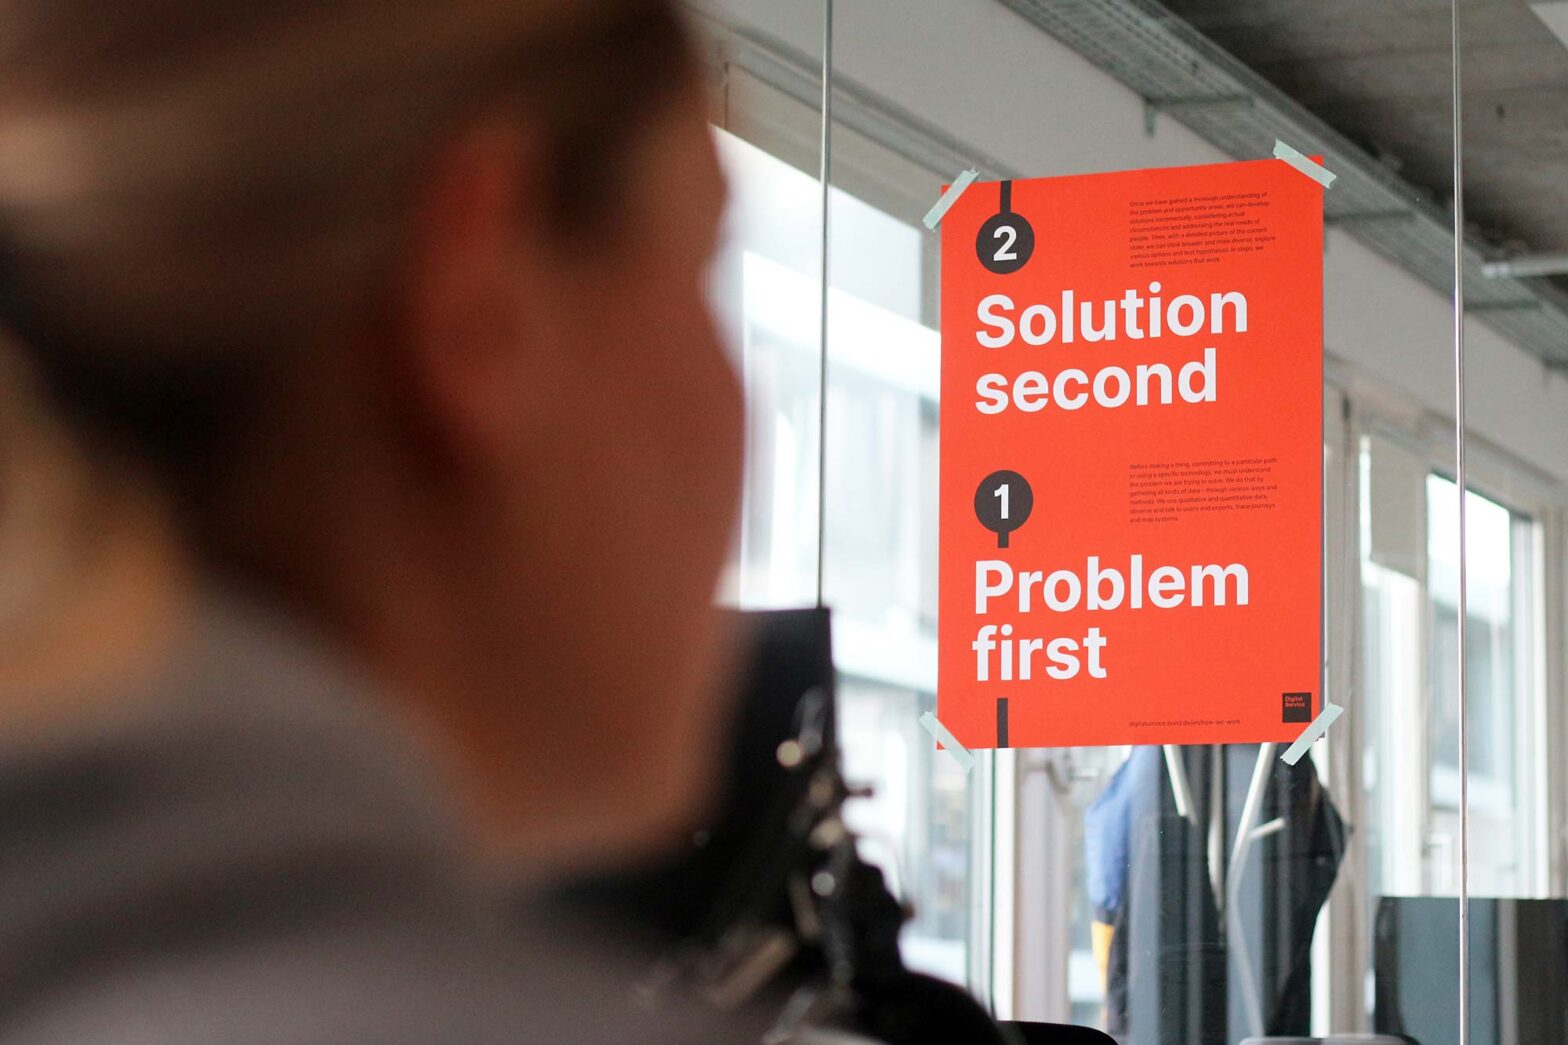 A bright orange poster stuck to a glass wall in a modern office space with a person sitting somewhat in front of it. The poster shows 2 steps in the style of underground map with numbers: 2 solution second 1 problem first further additional text is placed next to the numbers.